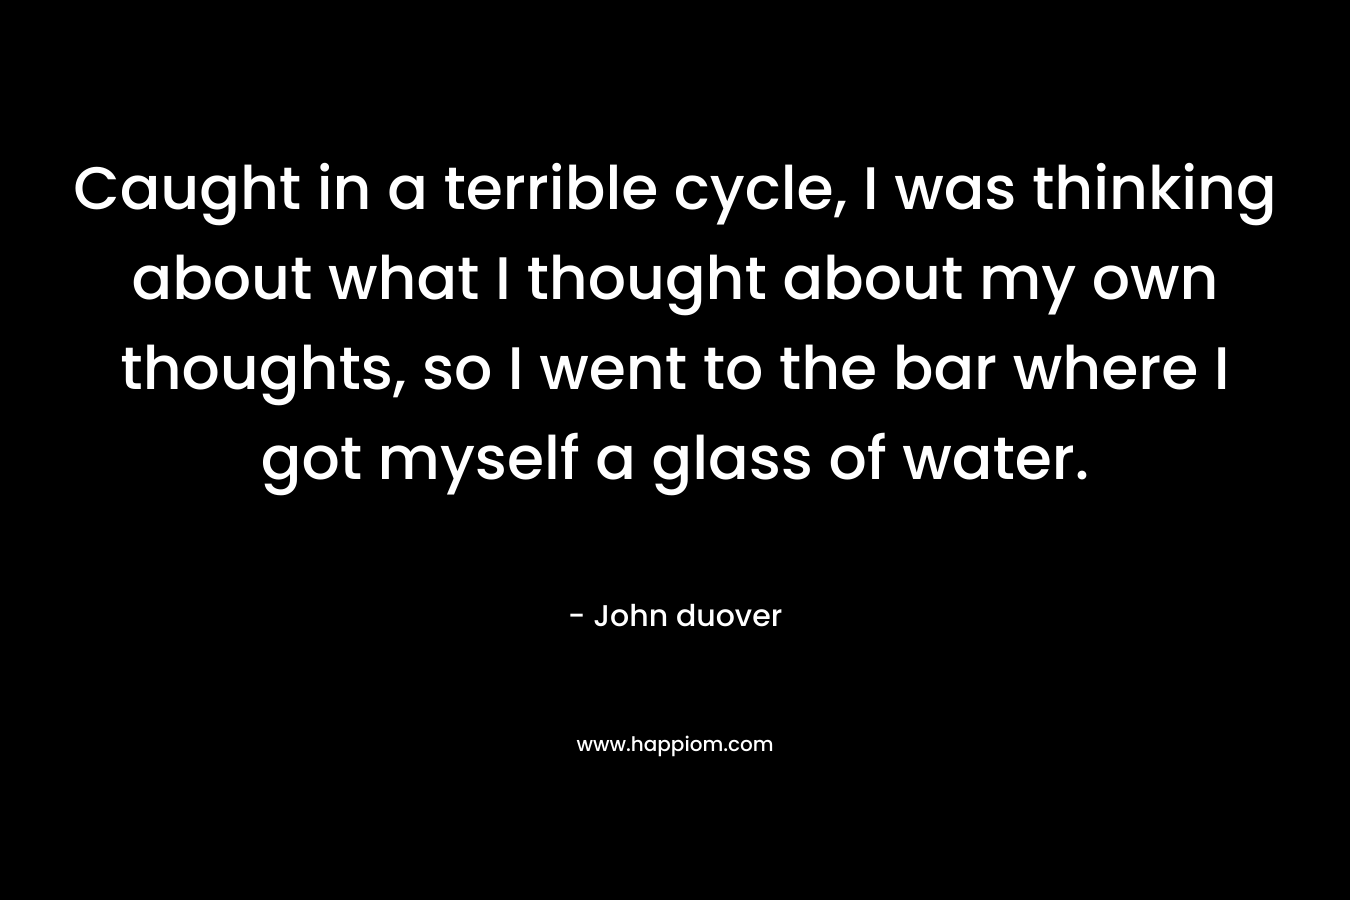 Caught in a terrible cycle, I was thinking about what I thought about my own thoughts, so I went to the bar where I got myself a glass of water. – John duover